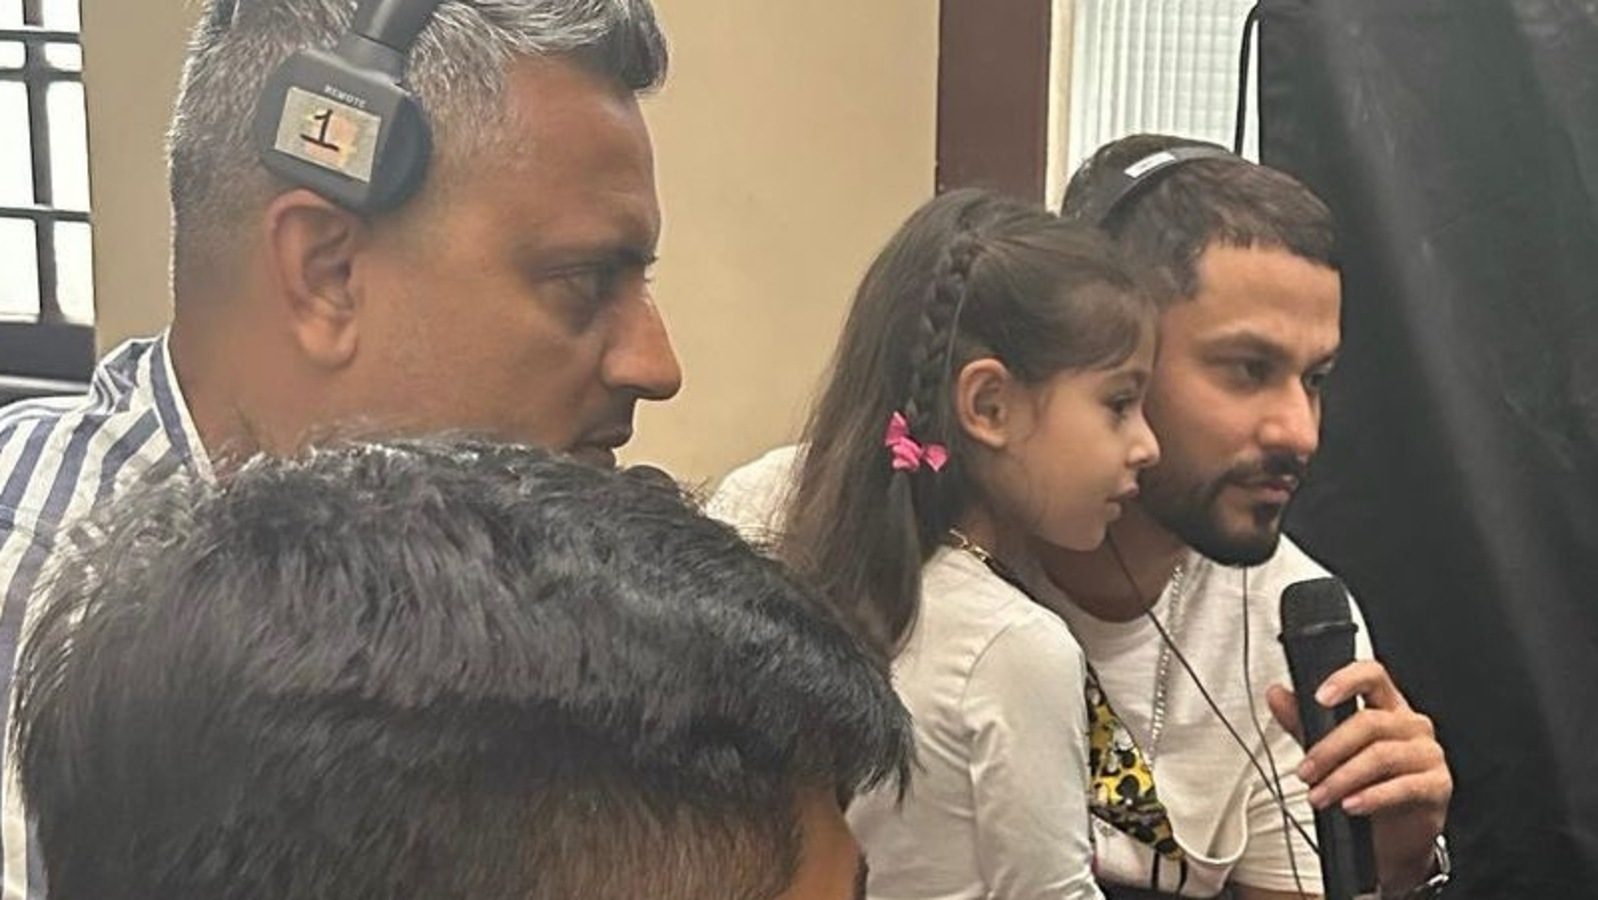 Inaaya Naumi Kemmu says ‘action’ from director’s chair on Kunal Kemmu’s first day directing. See pics